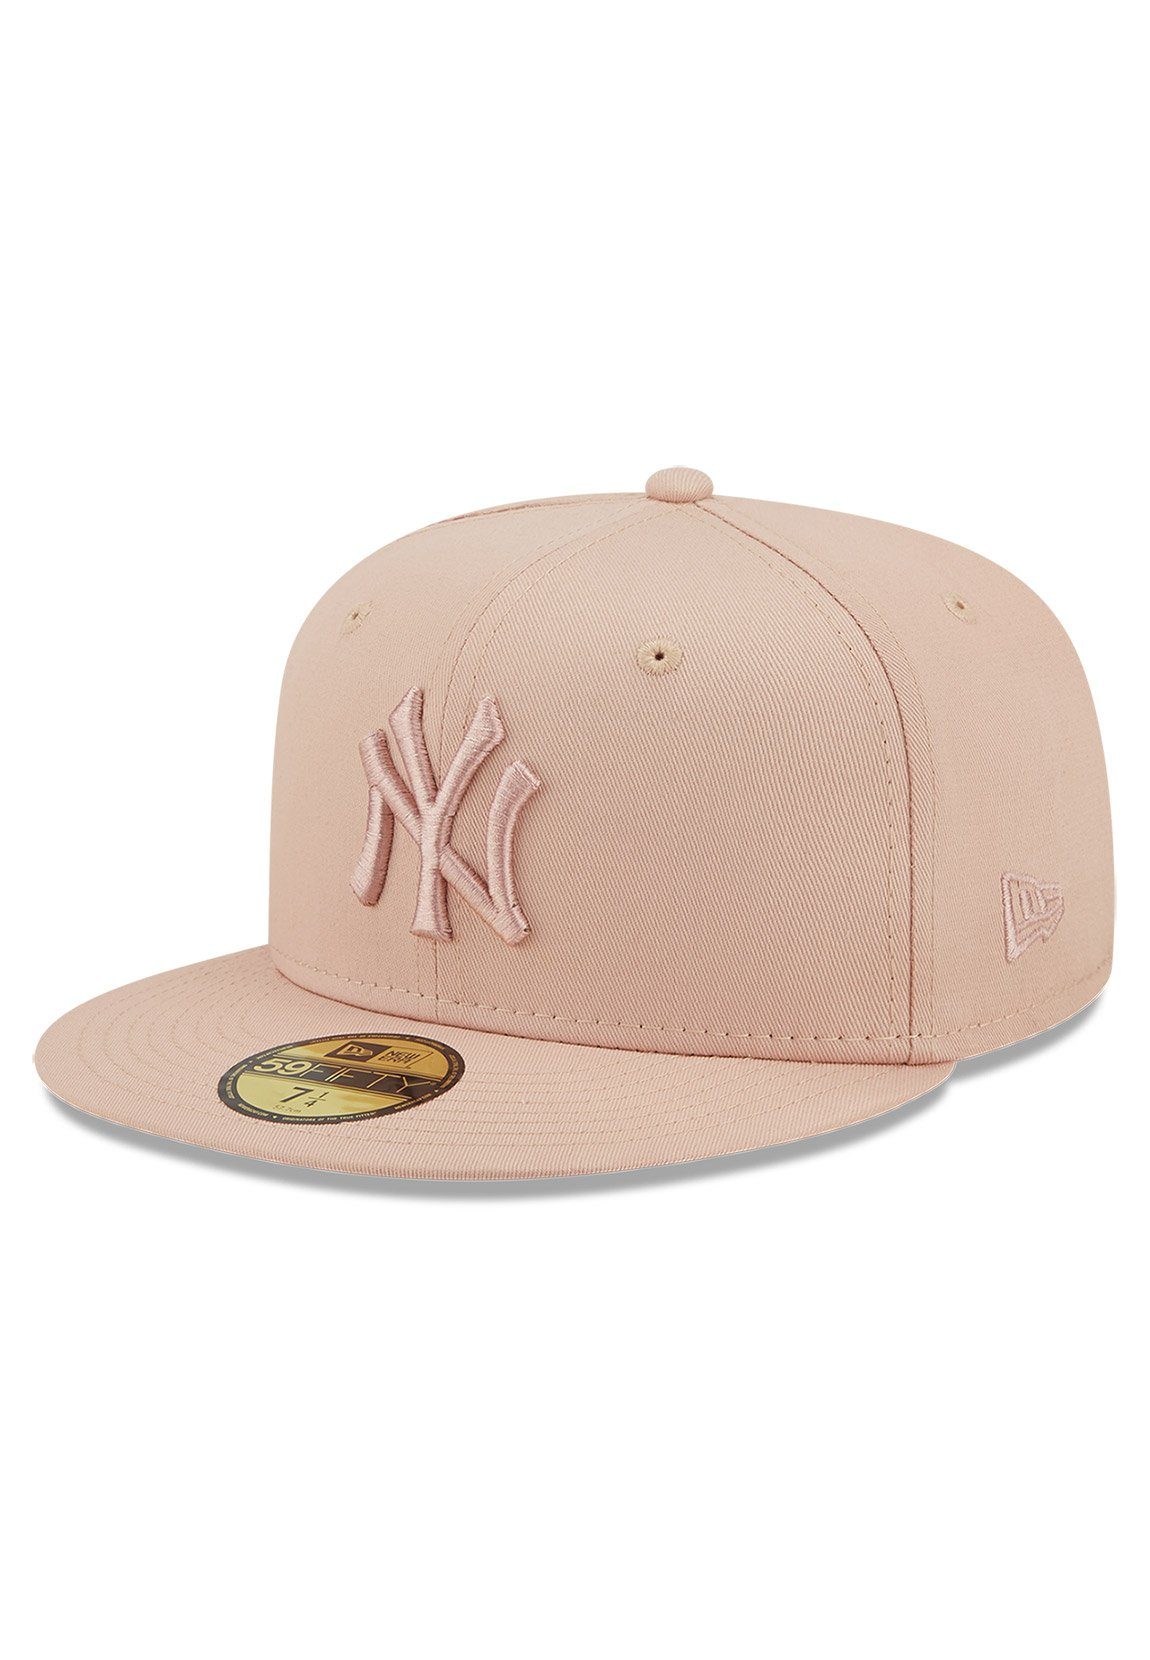 New Era Fitted Cap New Era League Essential 59Fifty Cap NY YANKEES Rosa | Fitted Caps